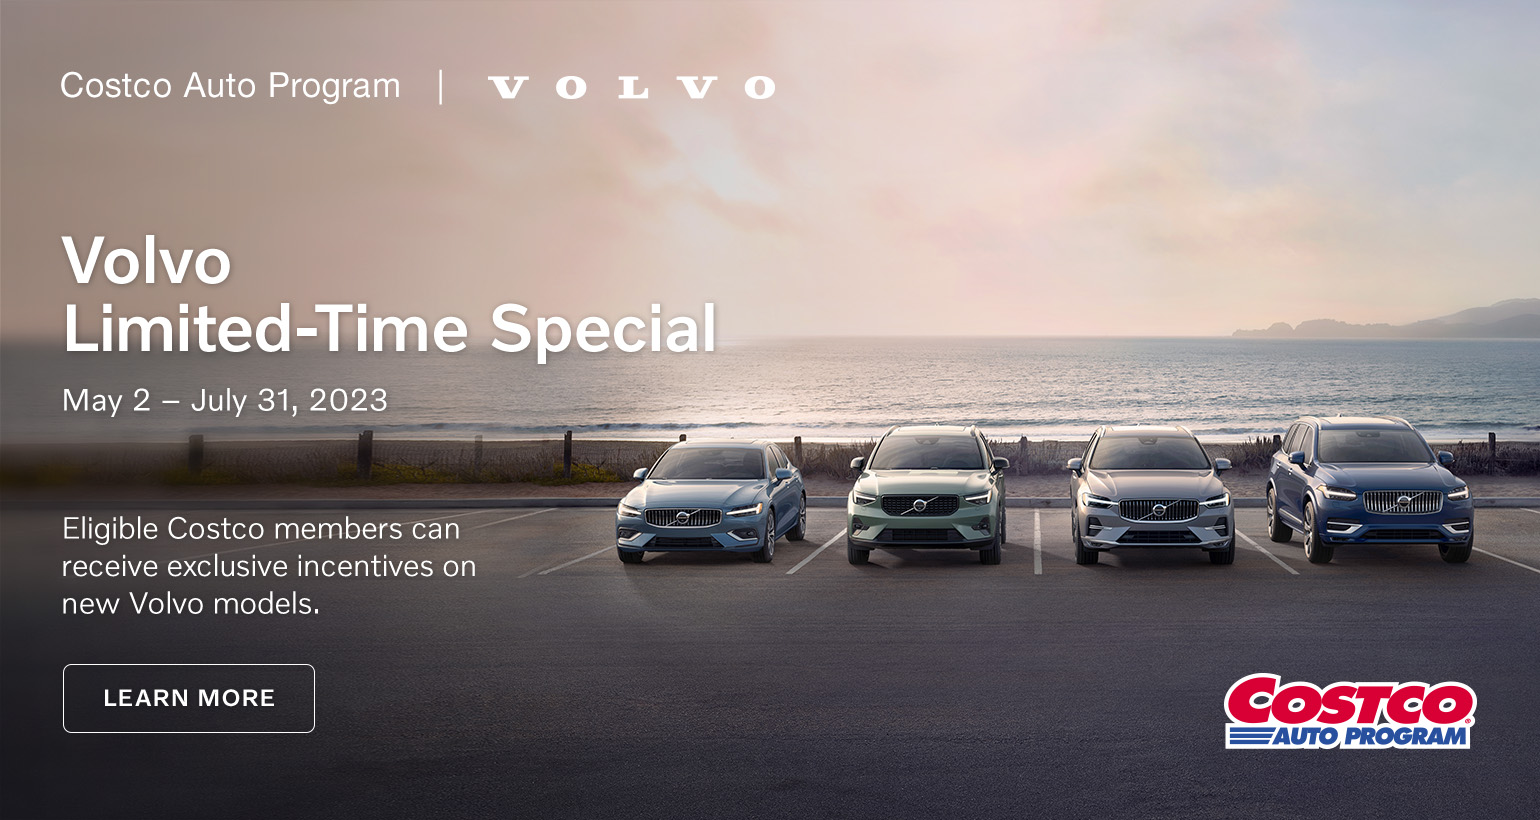 Costco Wholesale Auto Program Banner with Volvo Cars and limited time special on new Volvo models for eligible Costco members from May 2nd, 2023 to July 31st, 2023 with learn more button. Click image to learn more.